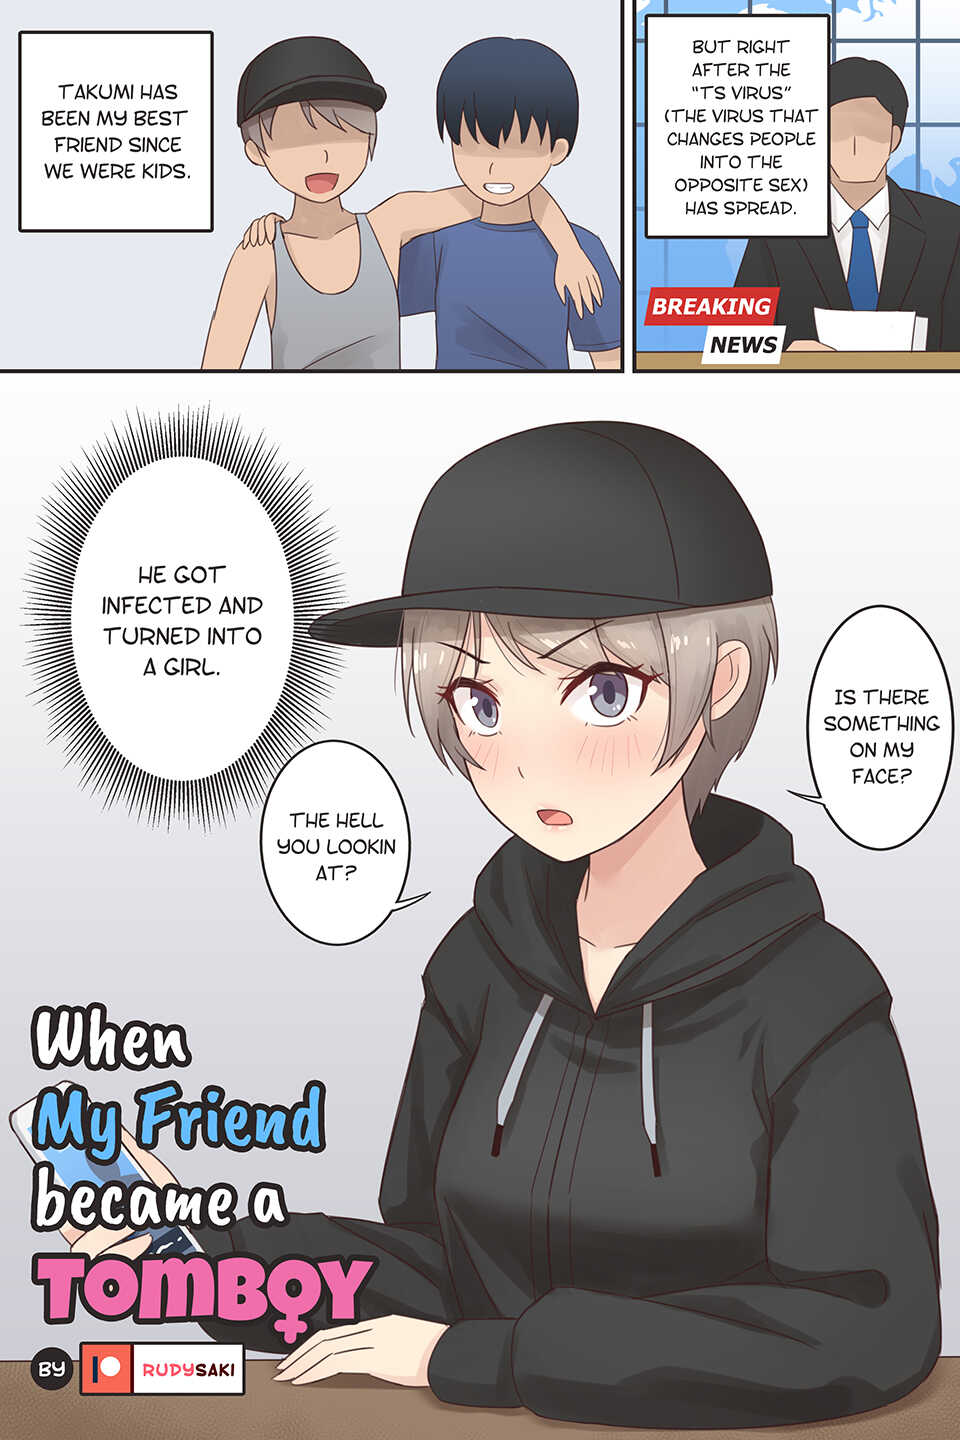 [RudySaki] When My Friend Became a Tomboy - Page 1